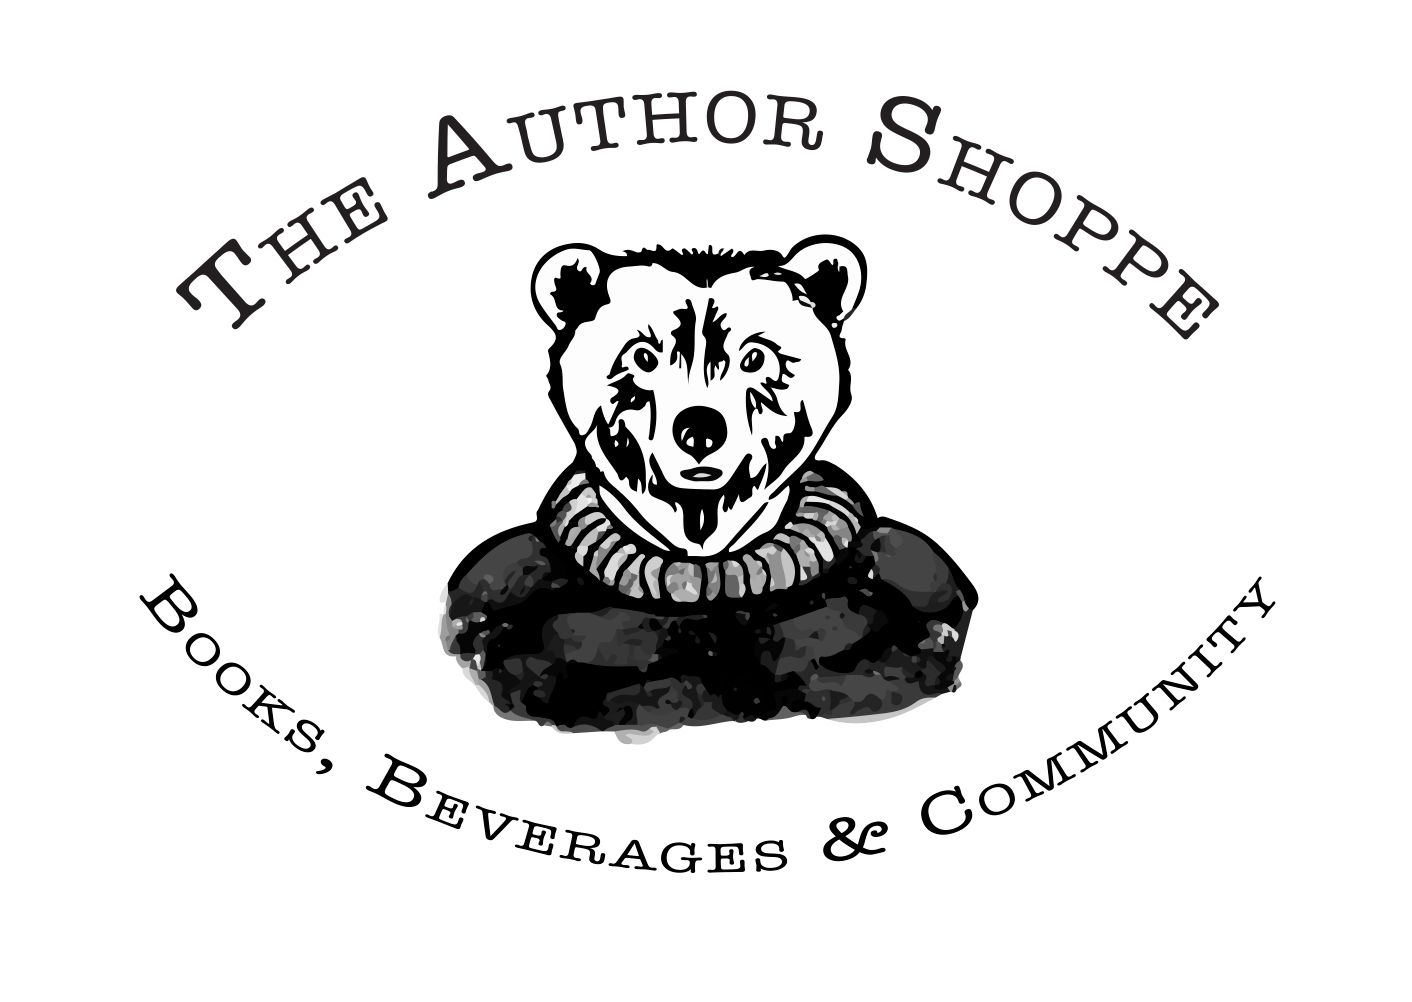 Logo for The Author Shoppe in Hattiesburg, MS